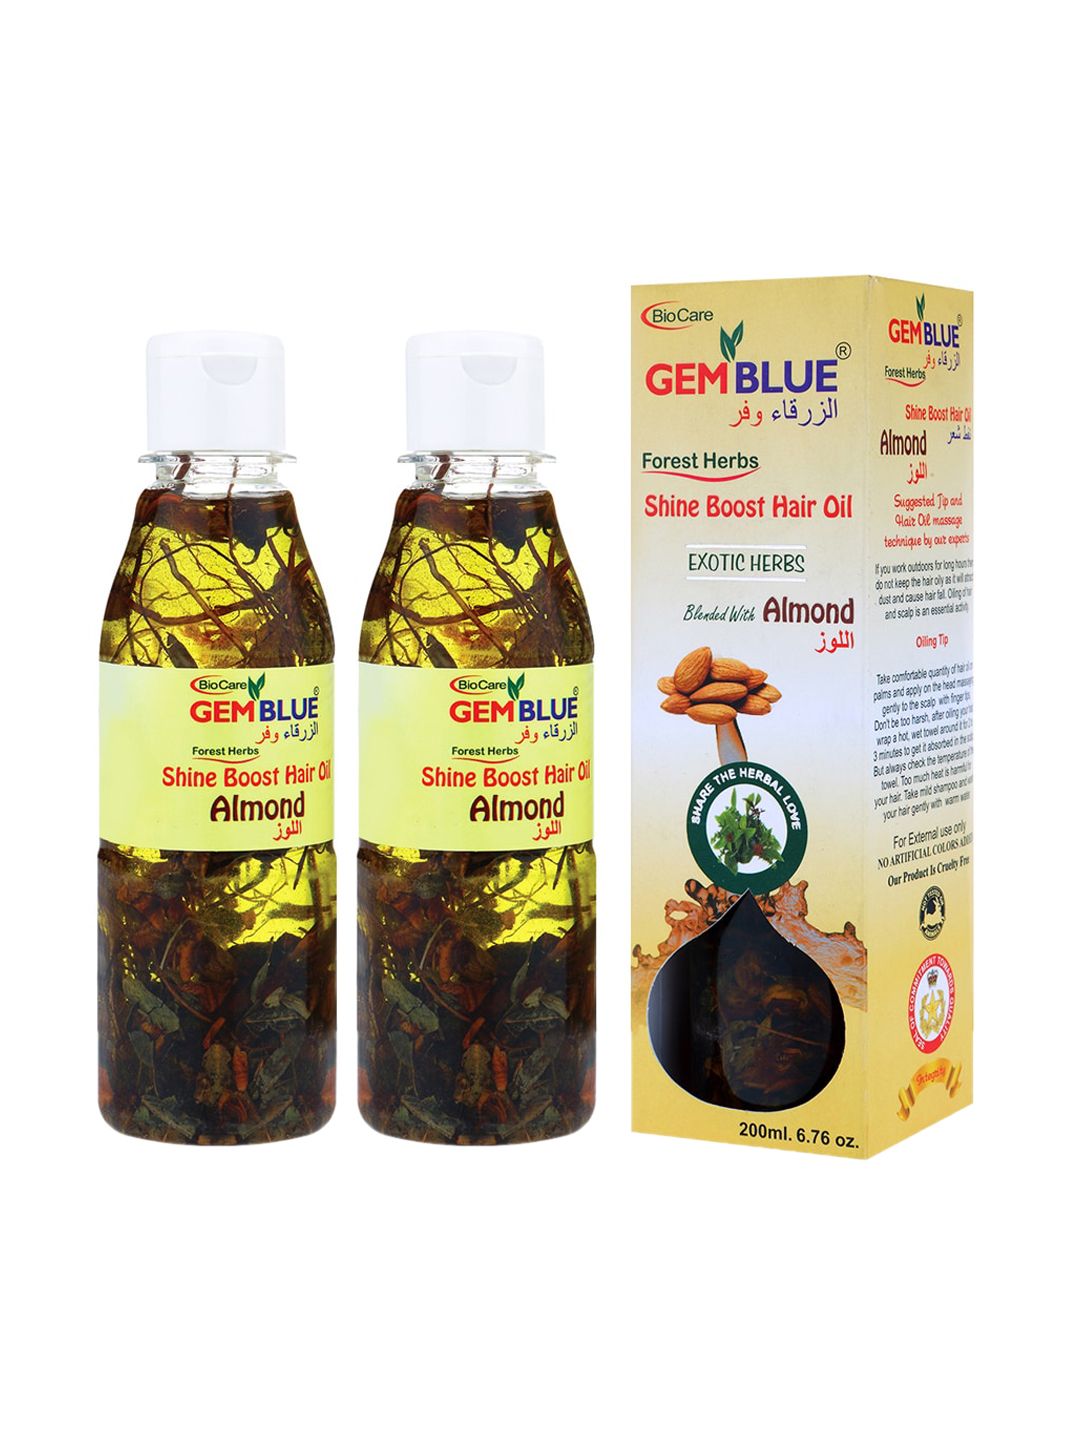 GEMBLUE BioCare Set of 2 Almond Hair Oil Price in India